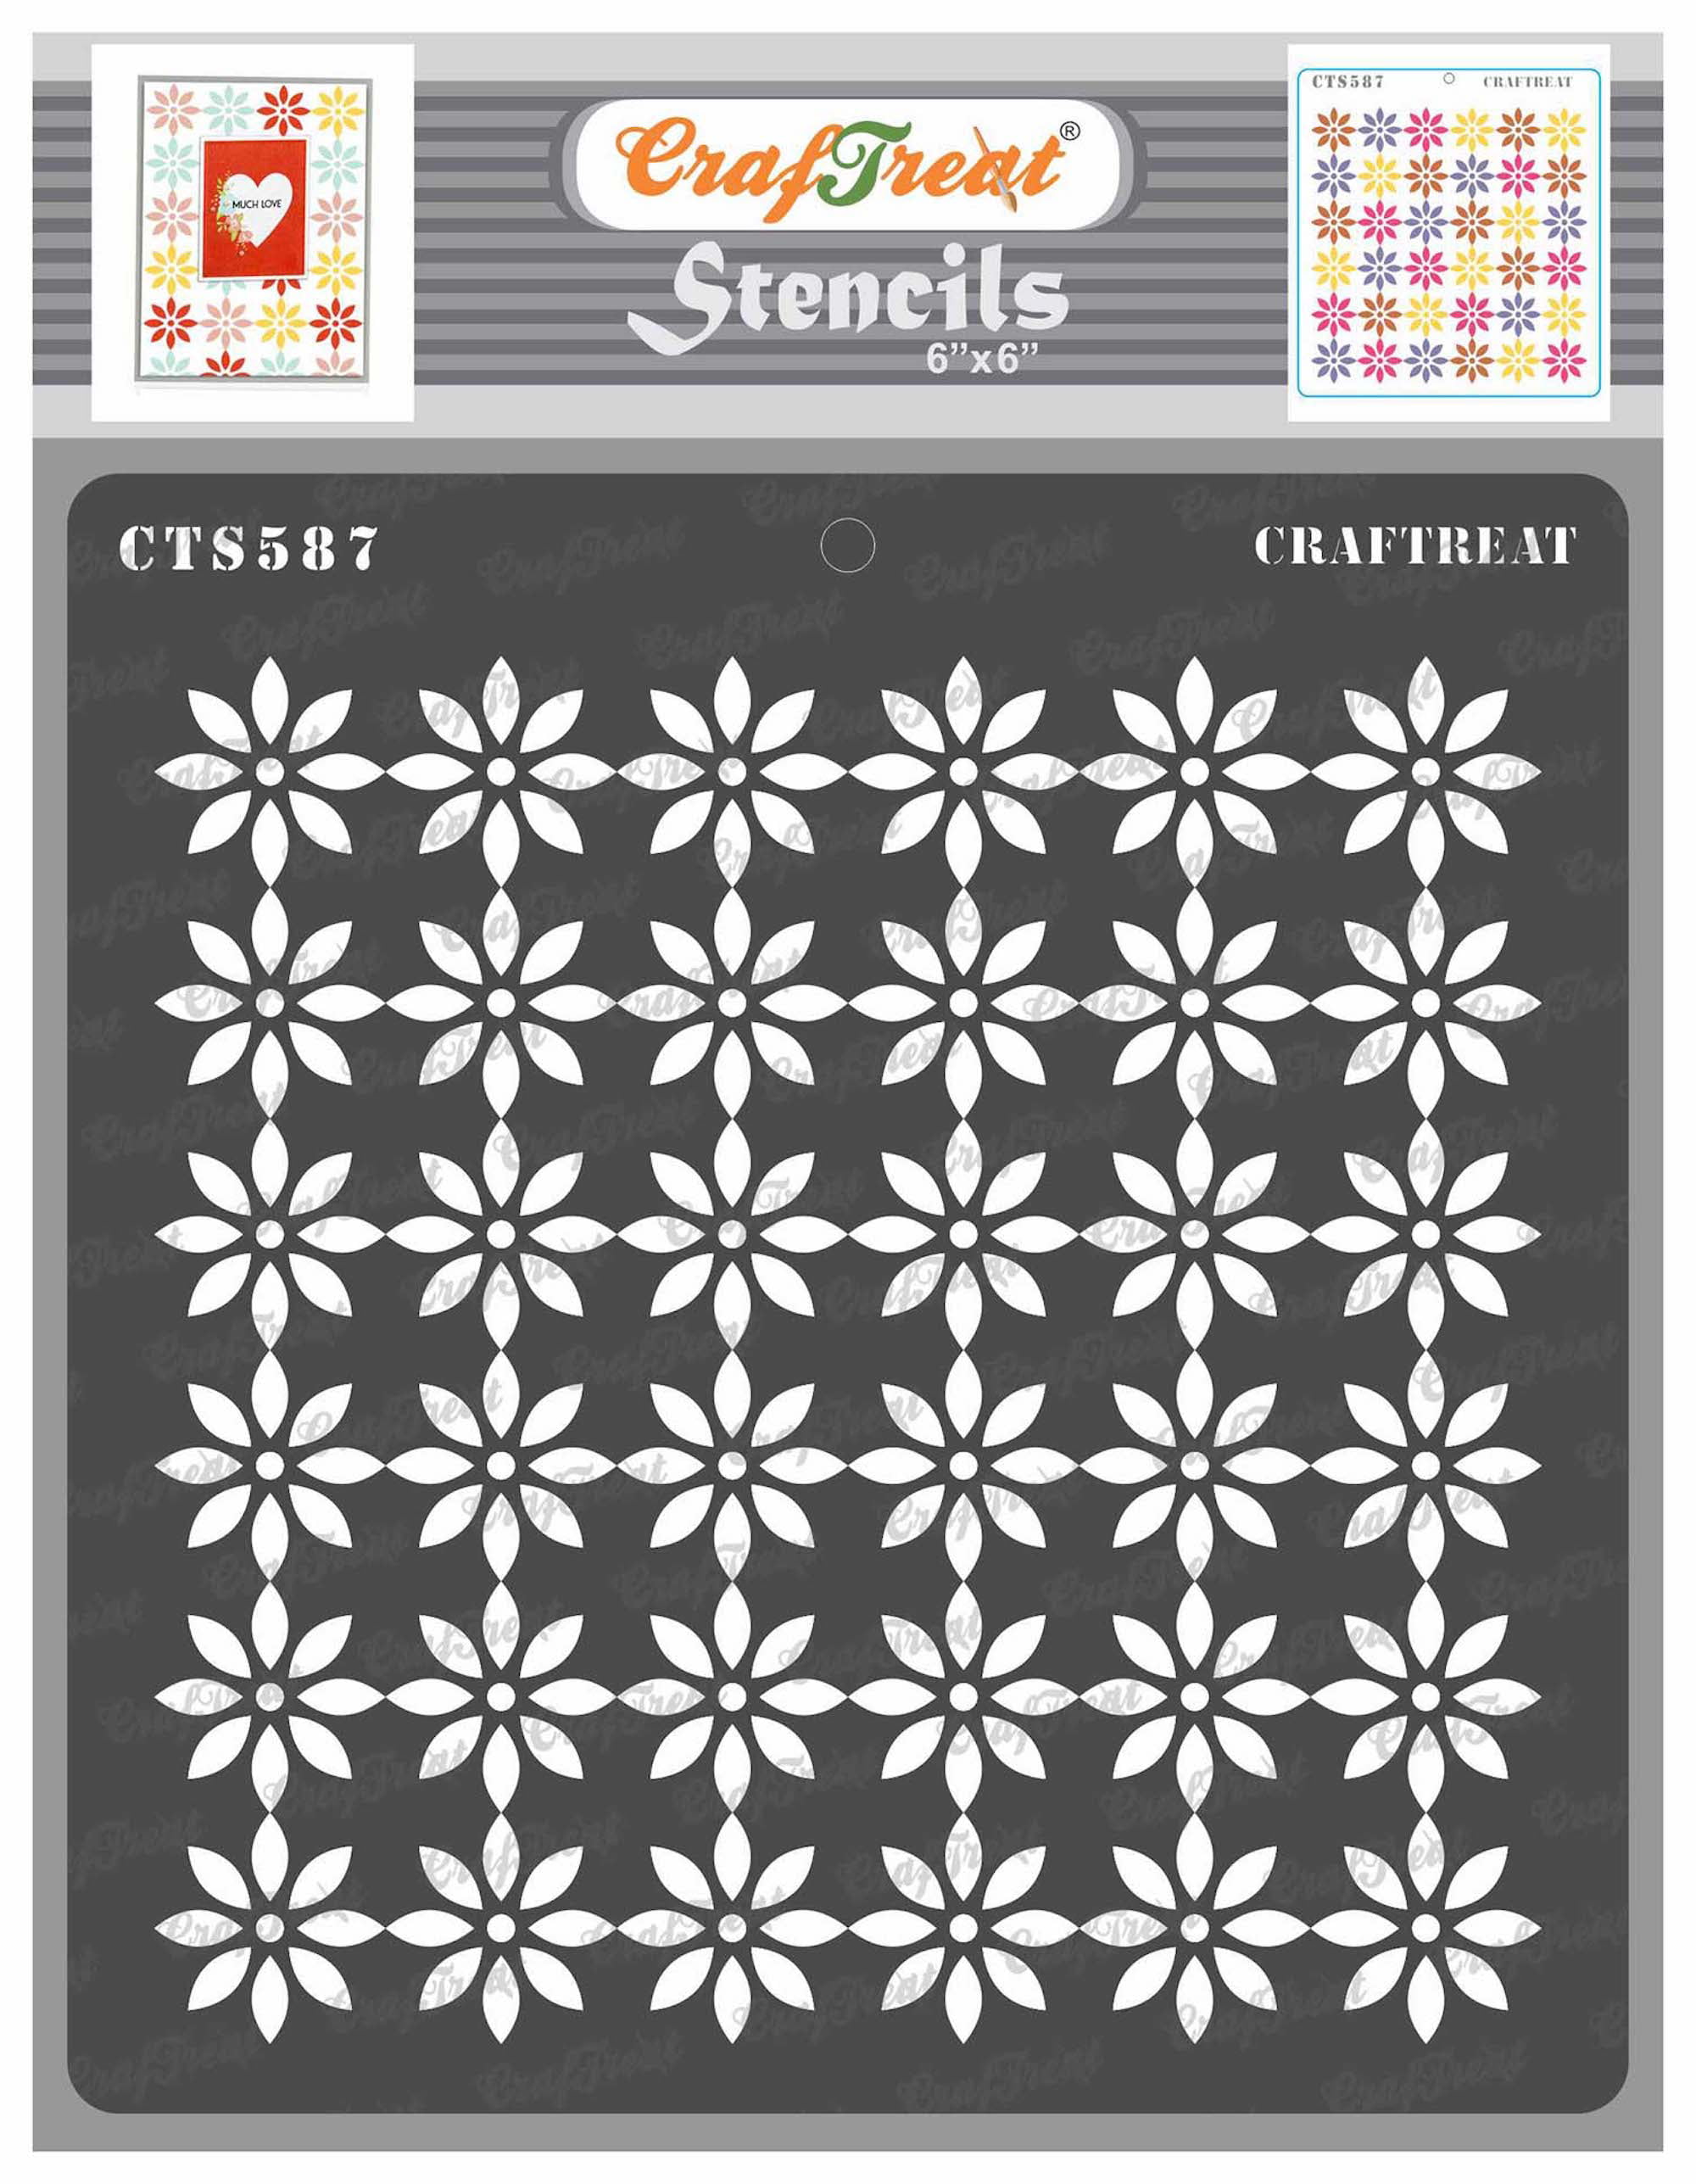 CrafTreat Geometric Shape Stencils for Painting on Wood, Wall, Tile, Canvas, Paper, Fabric and Floor - Frames and Masks - 6x6 inch - Reusable DIY